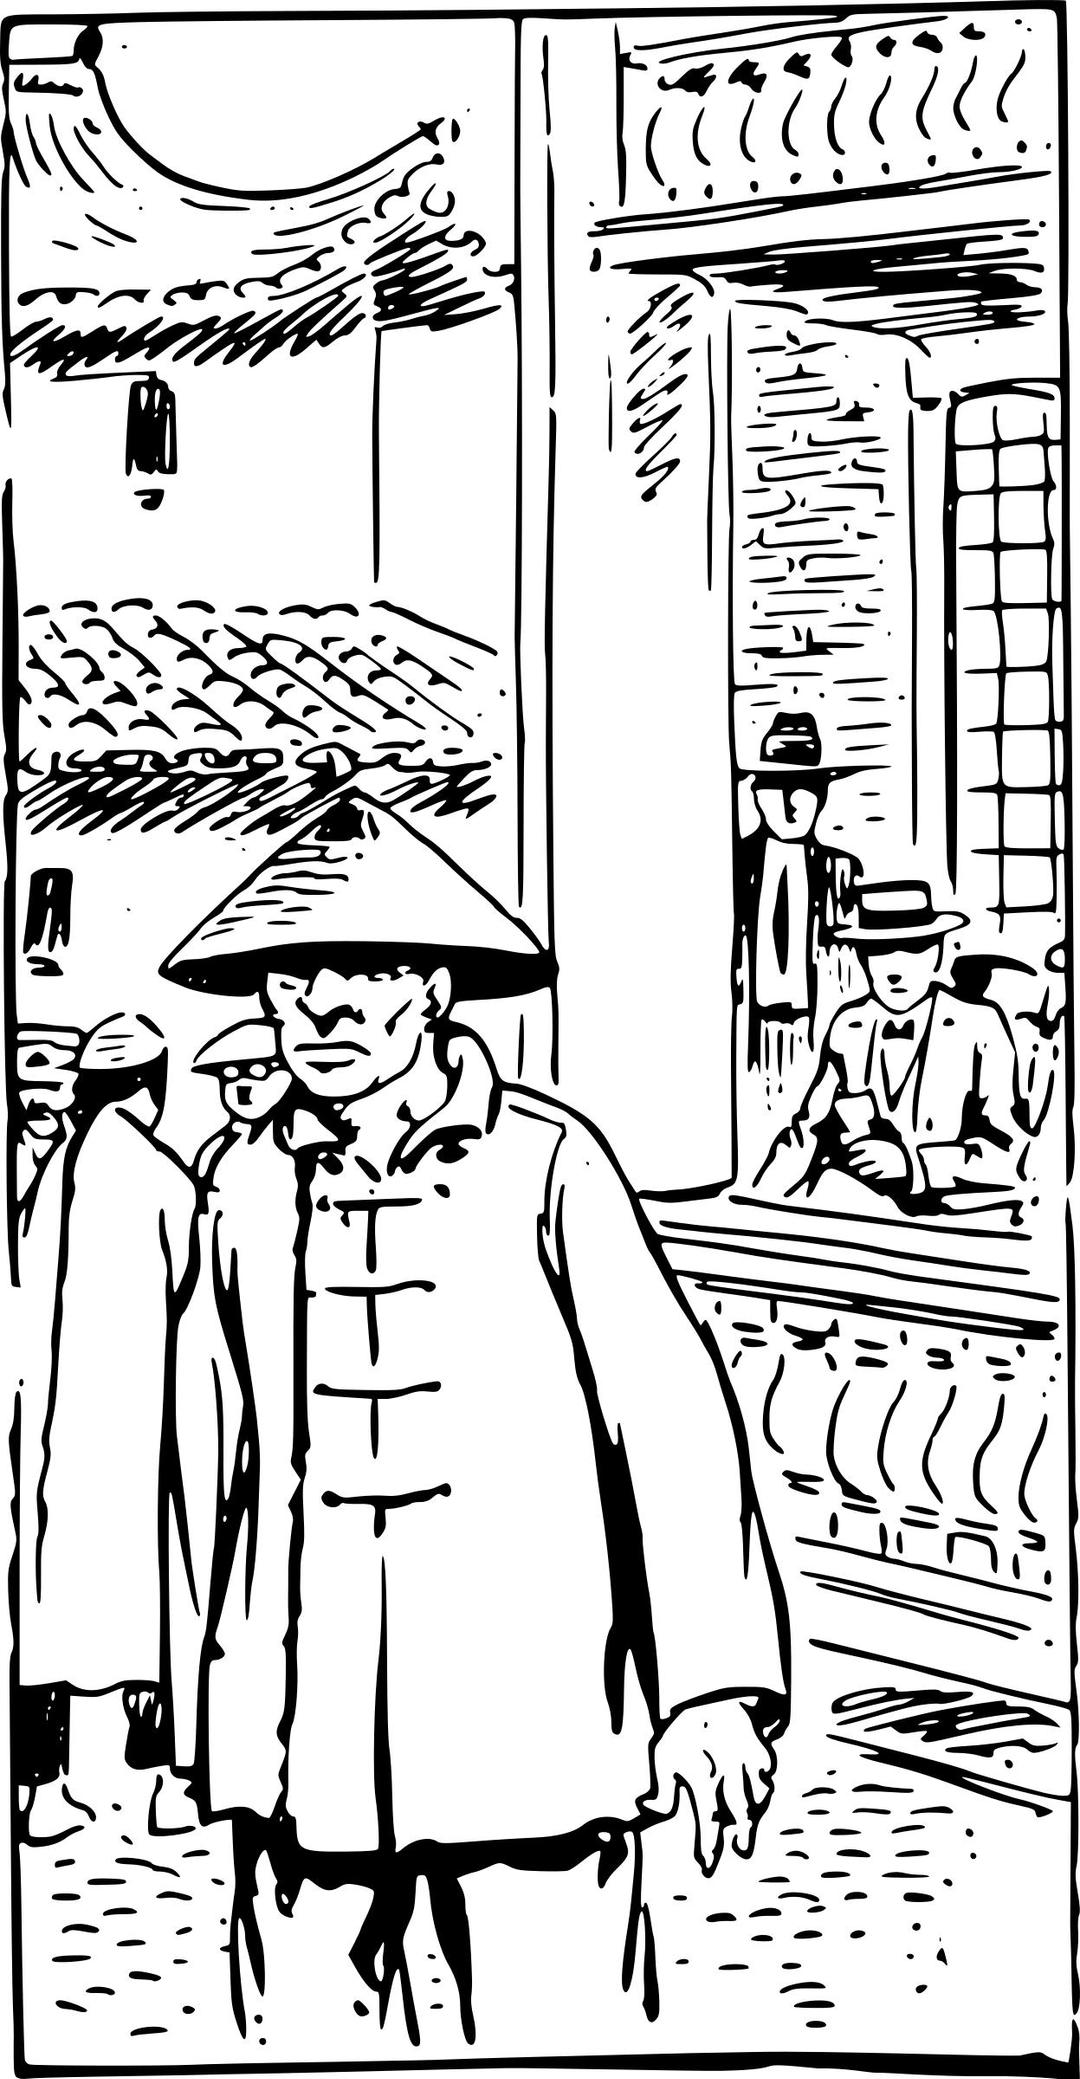 Stereotypical Chinese Man - 1916 png transparent